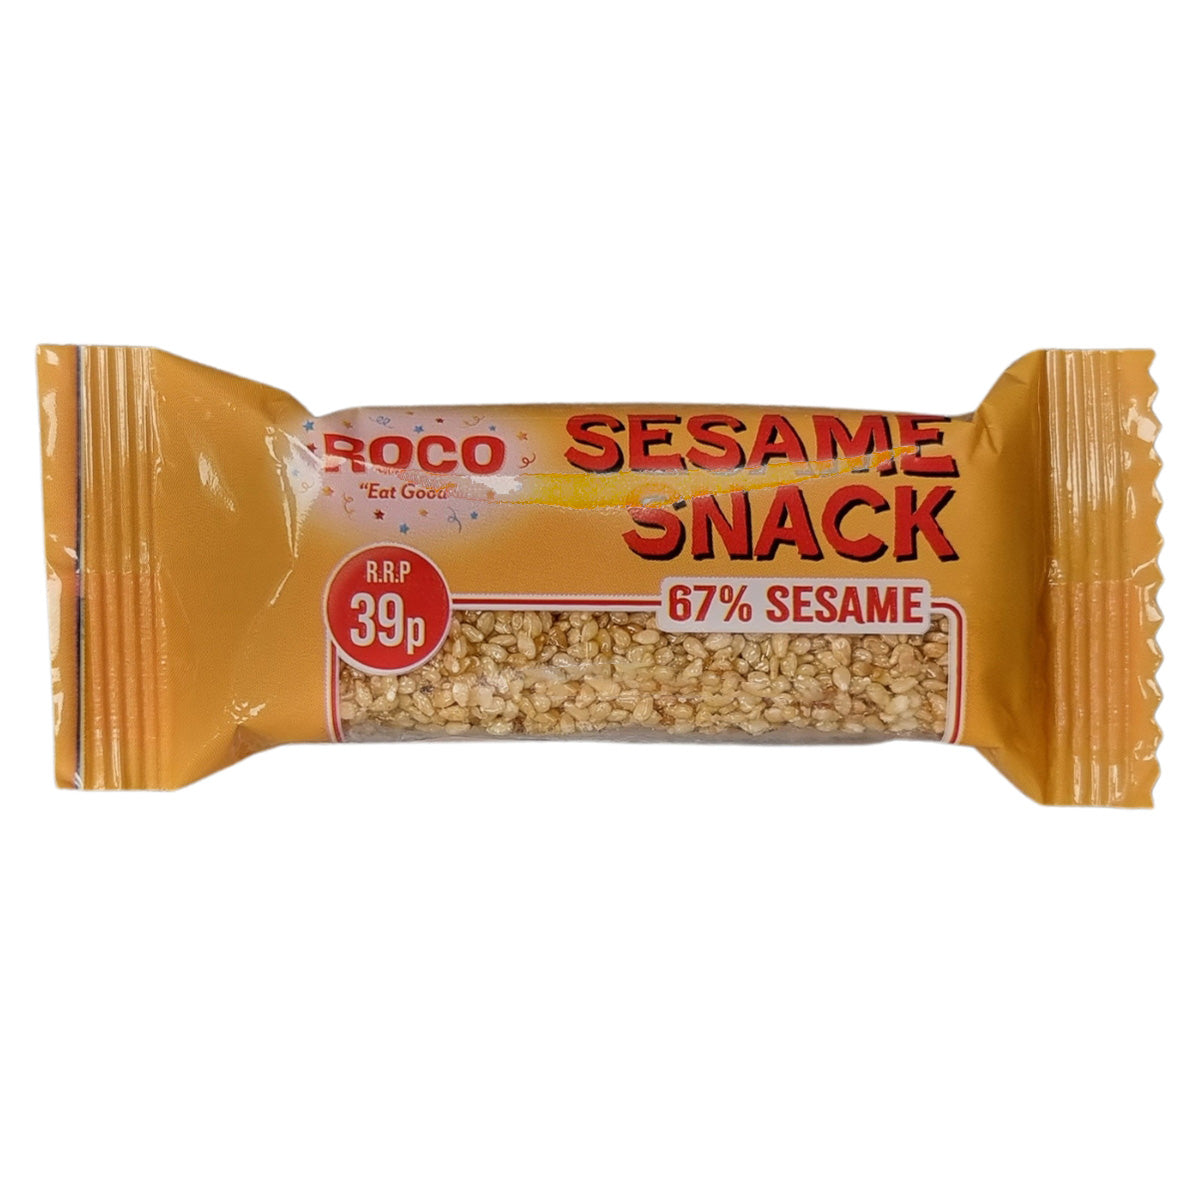 Roco - Sesame Snack - 25g - Continental Food Store